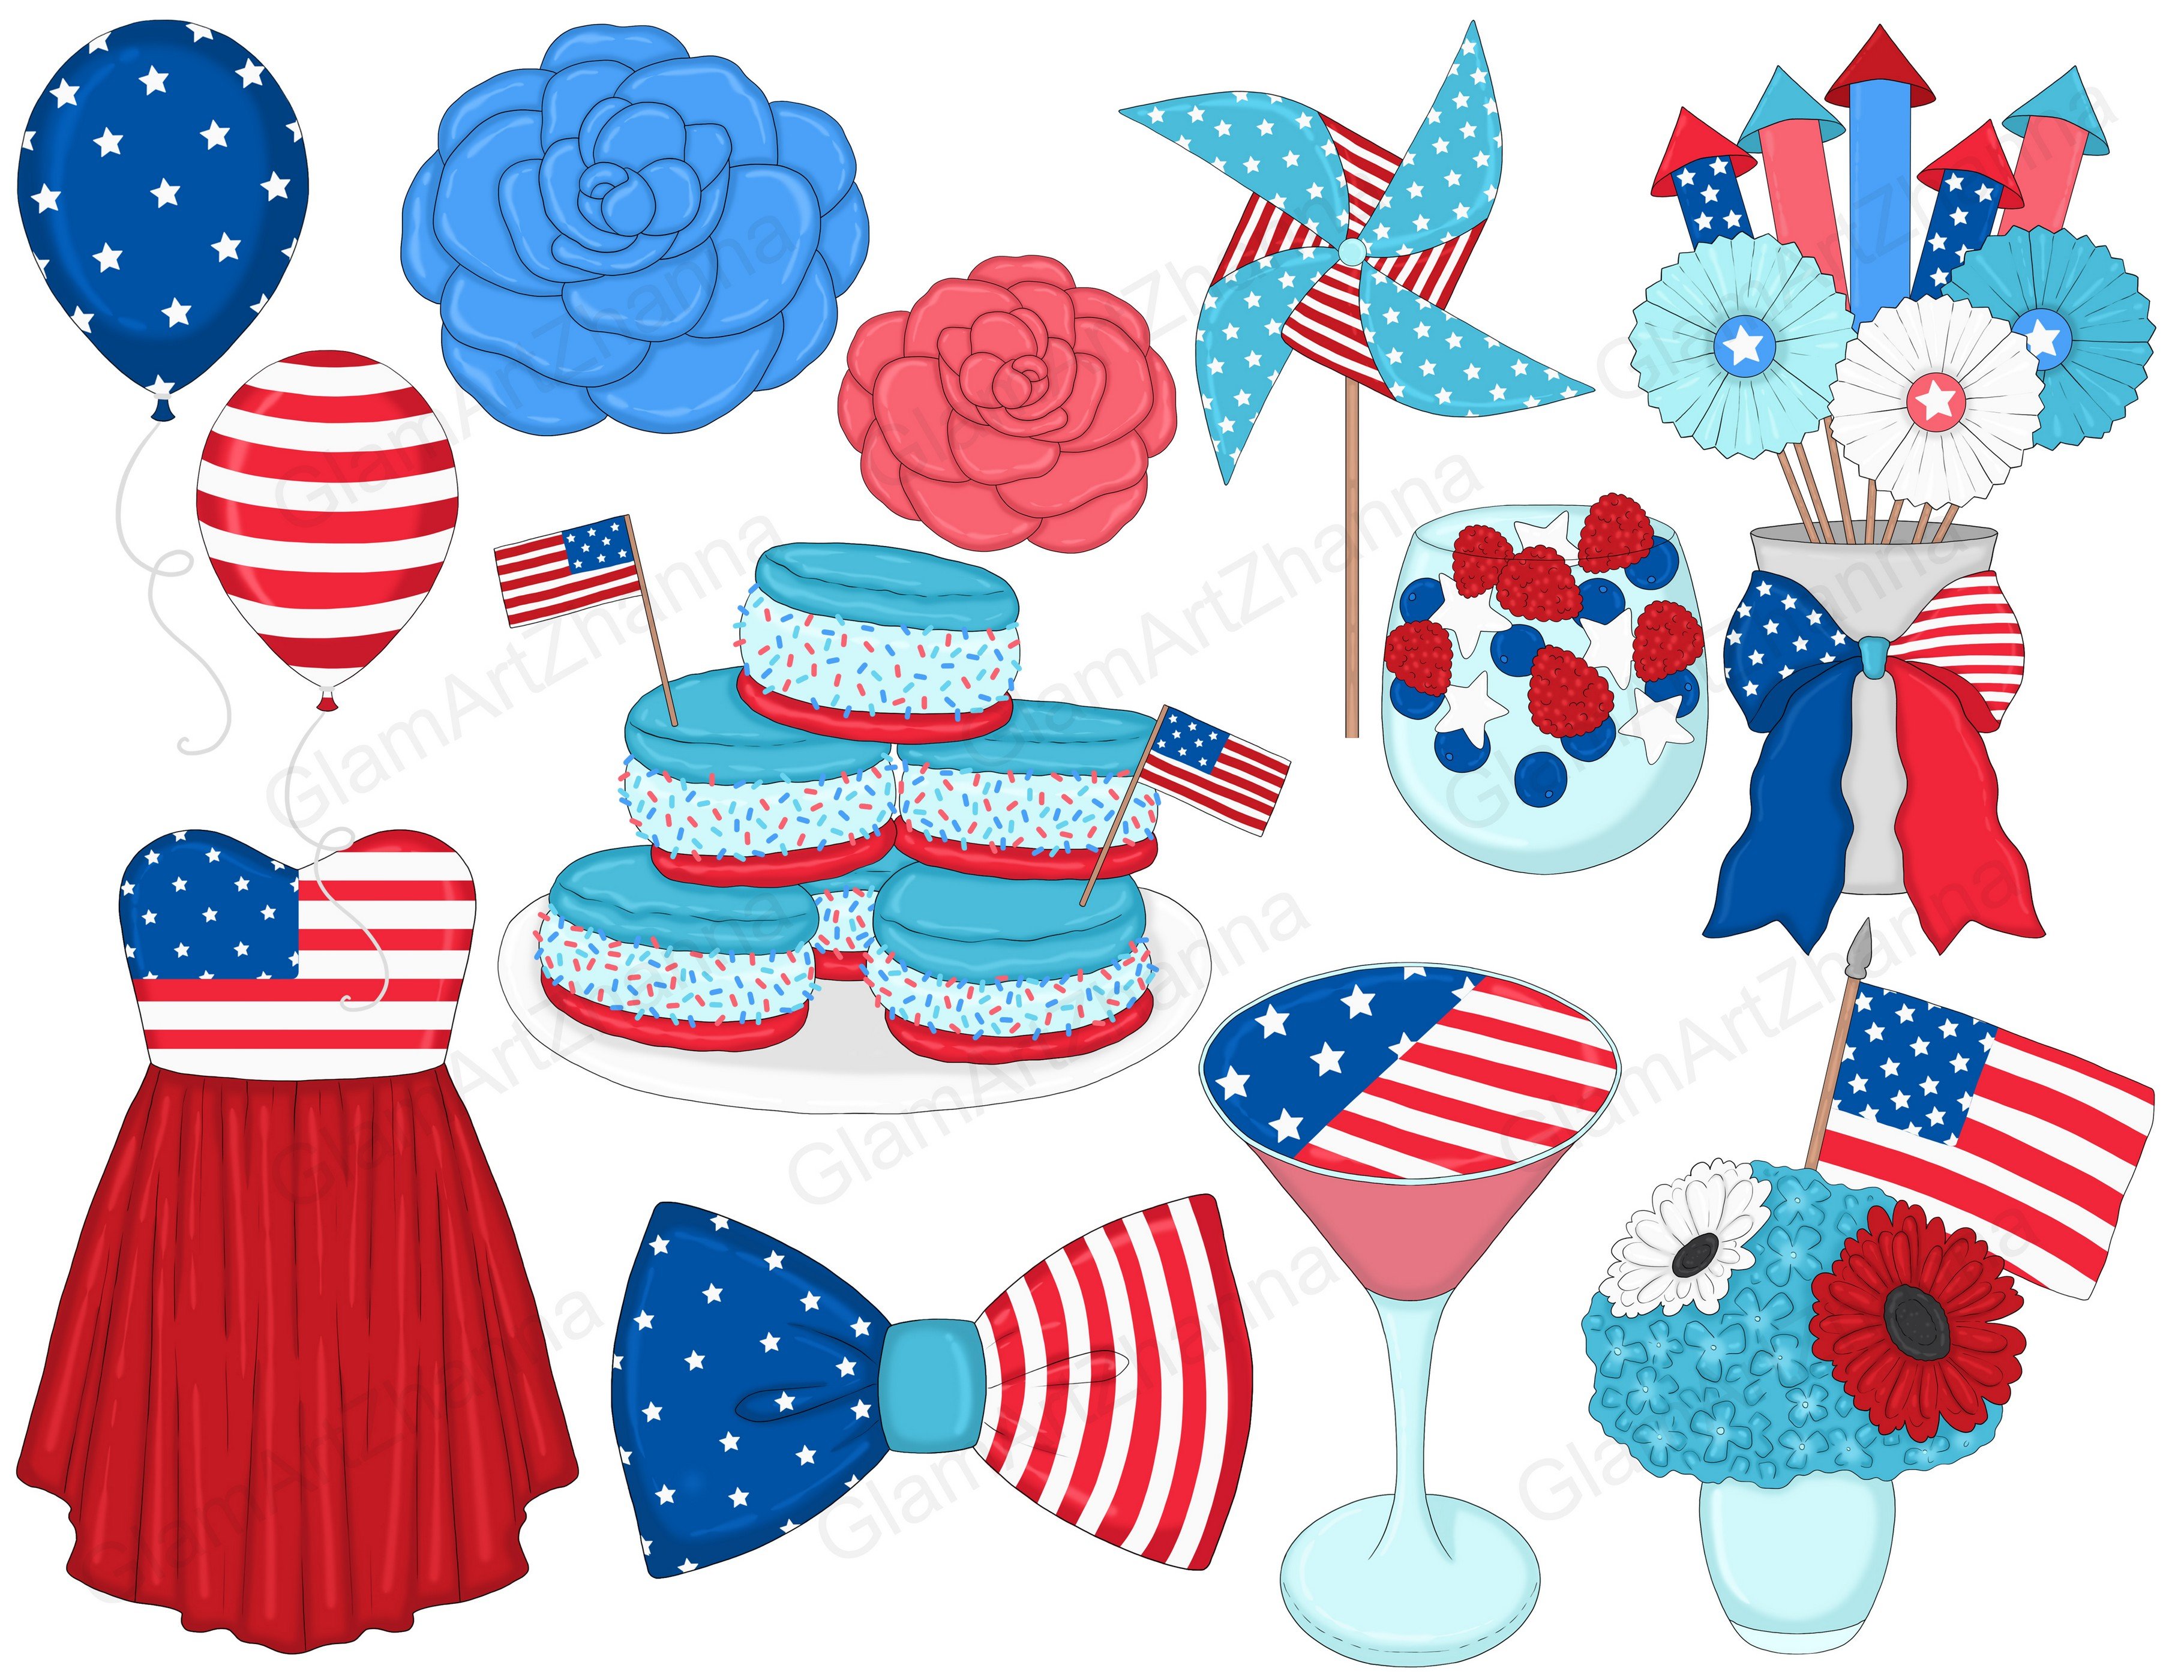 Some multicolor items to create a nice Independence illustration.